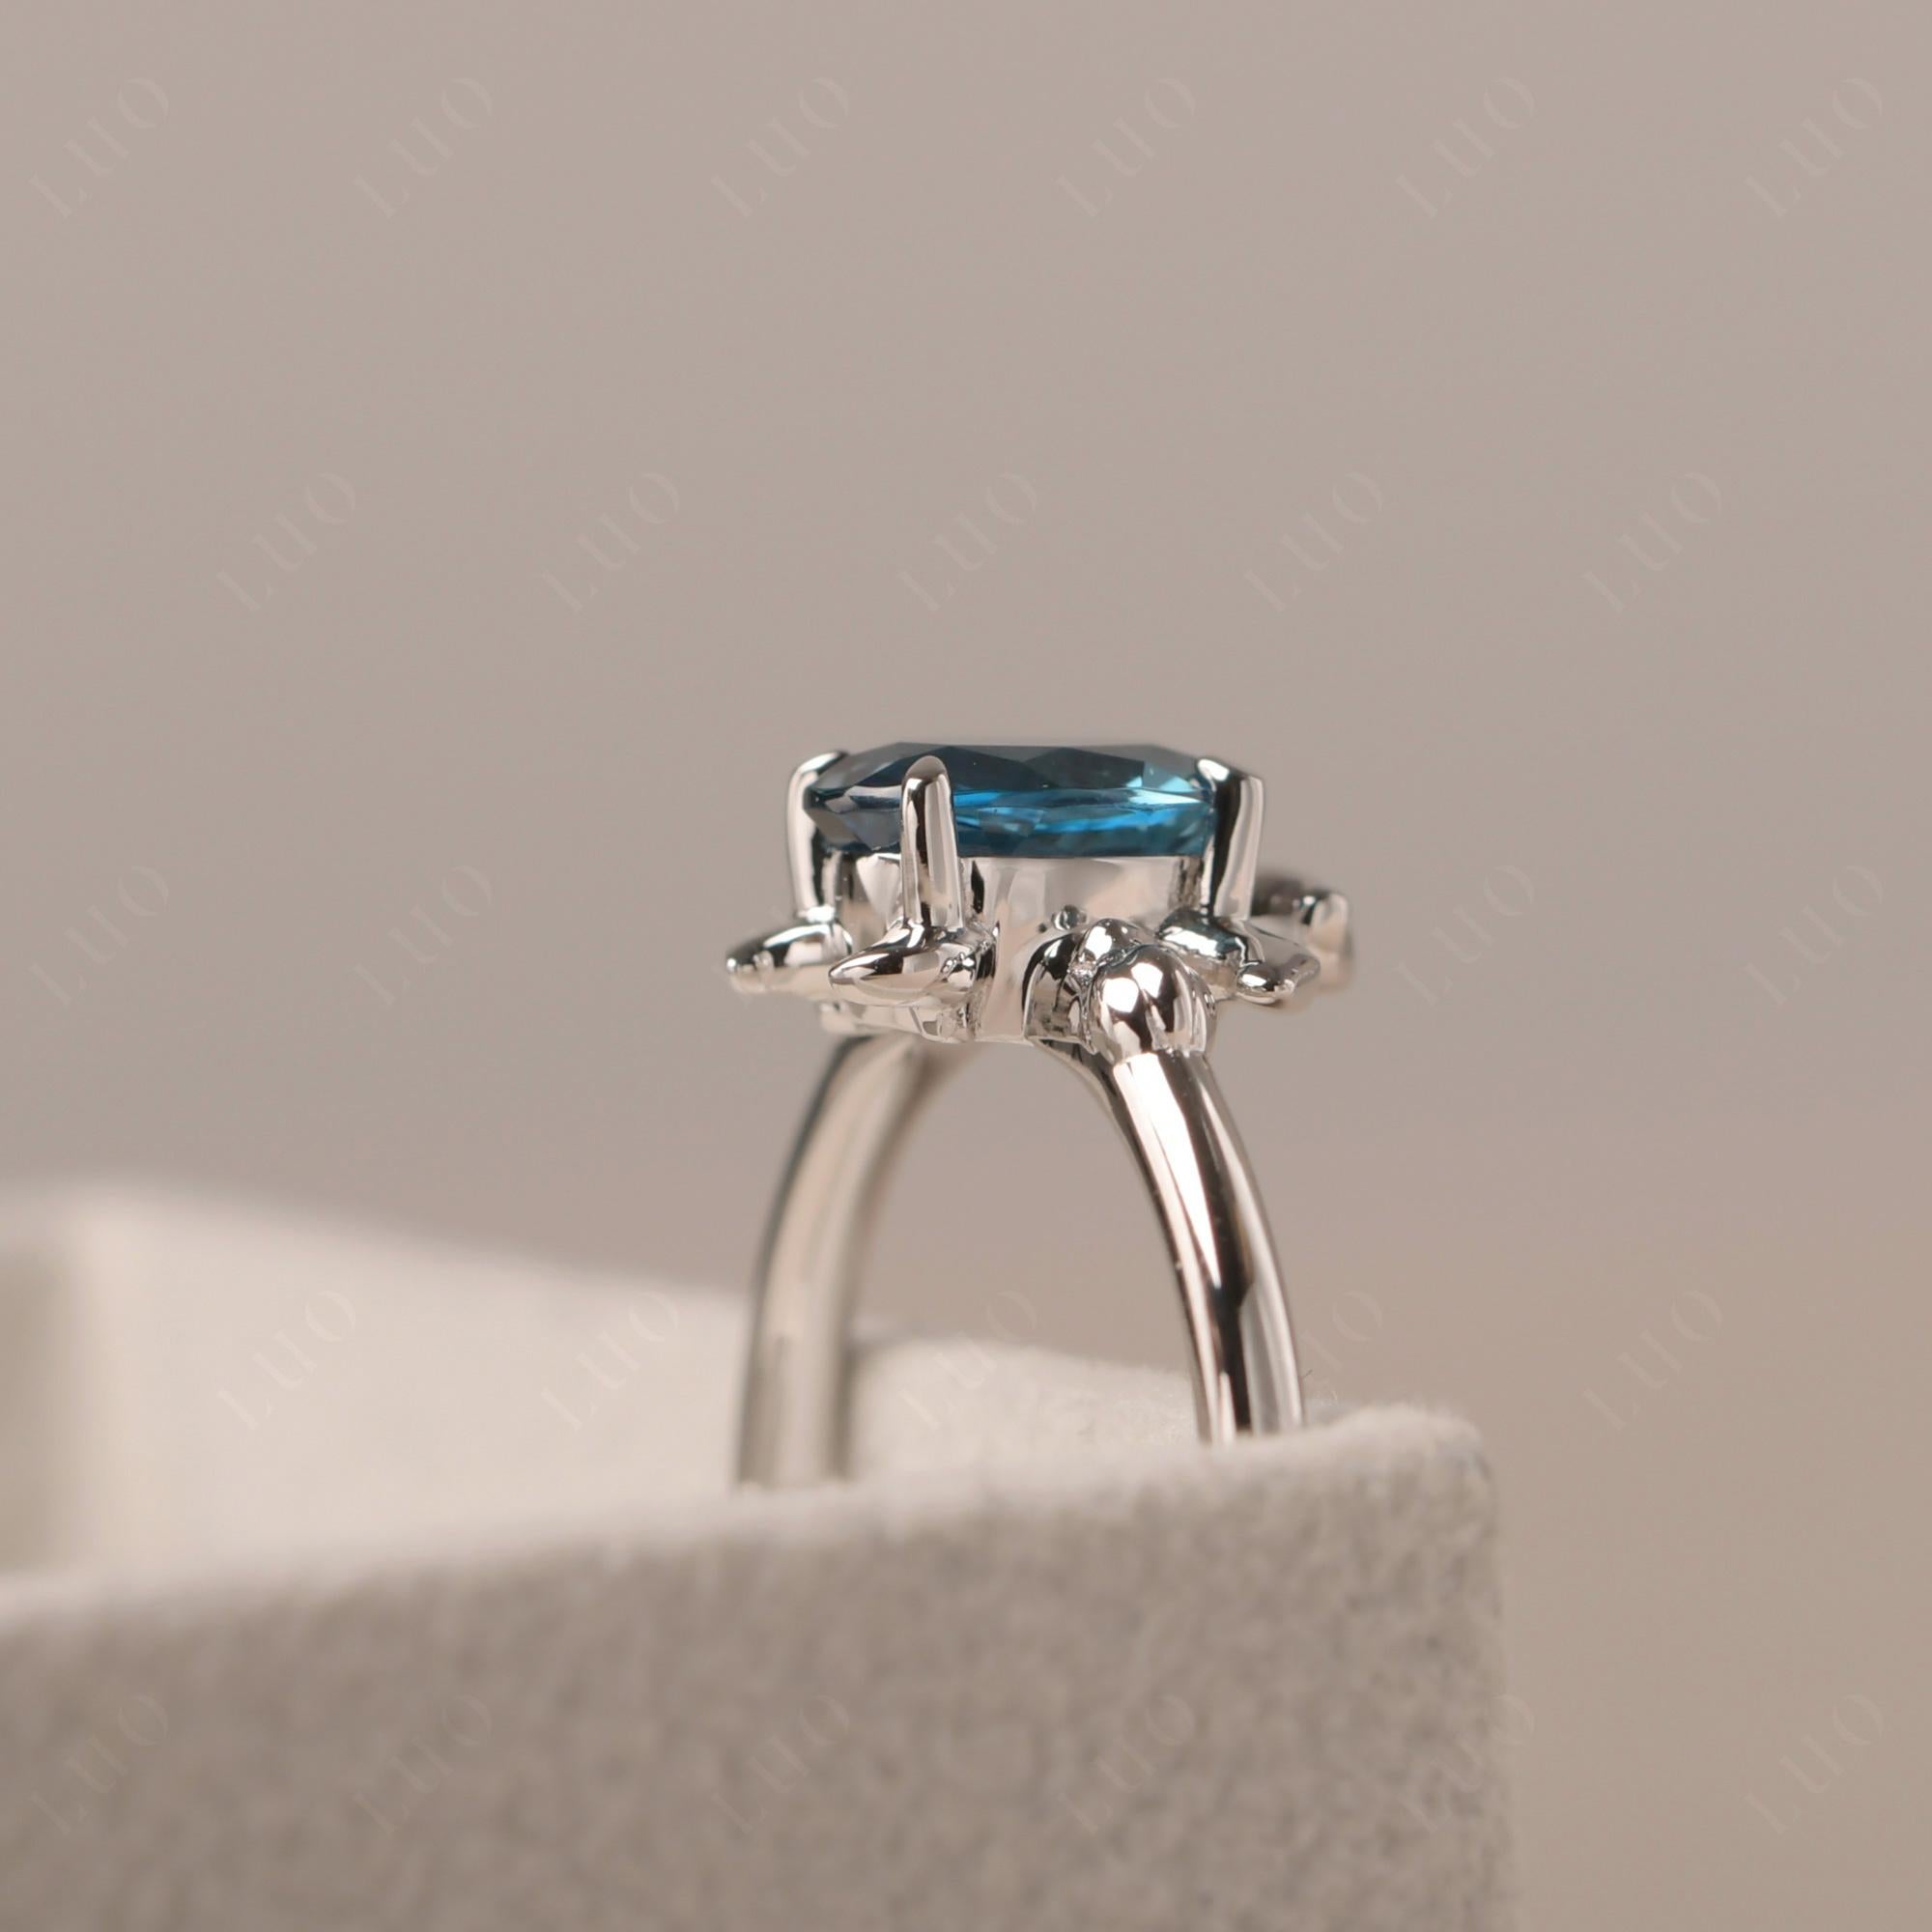 Oval Cut London Blue Topaz Turtle Ring - LUO Jewelry